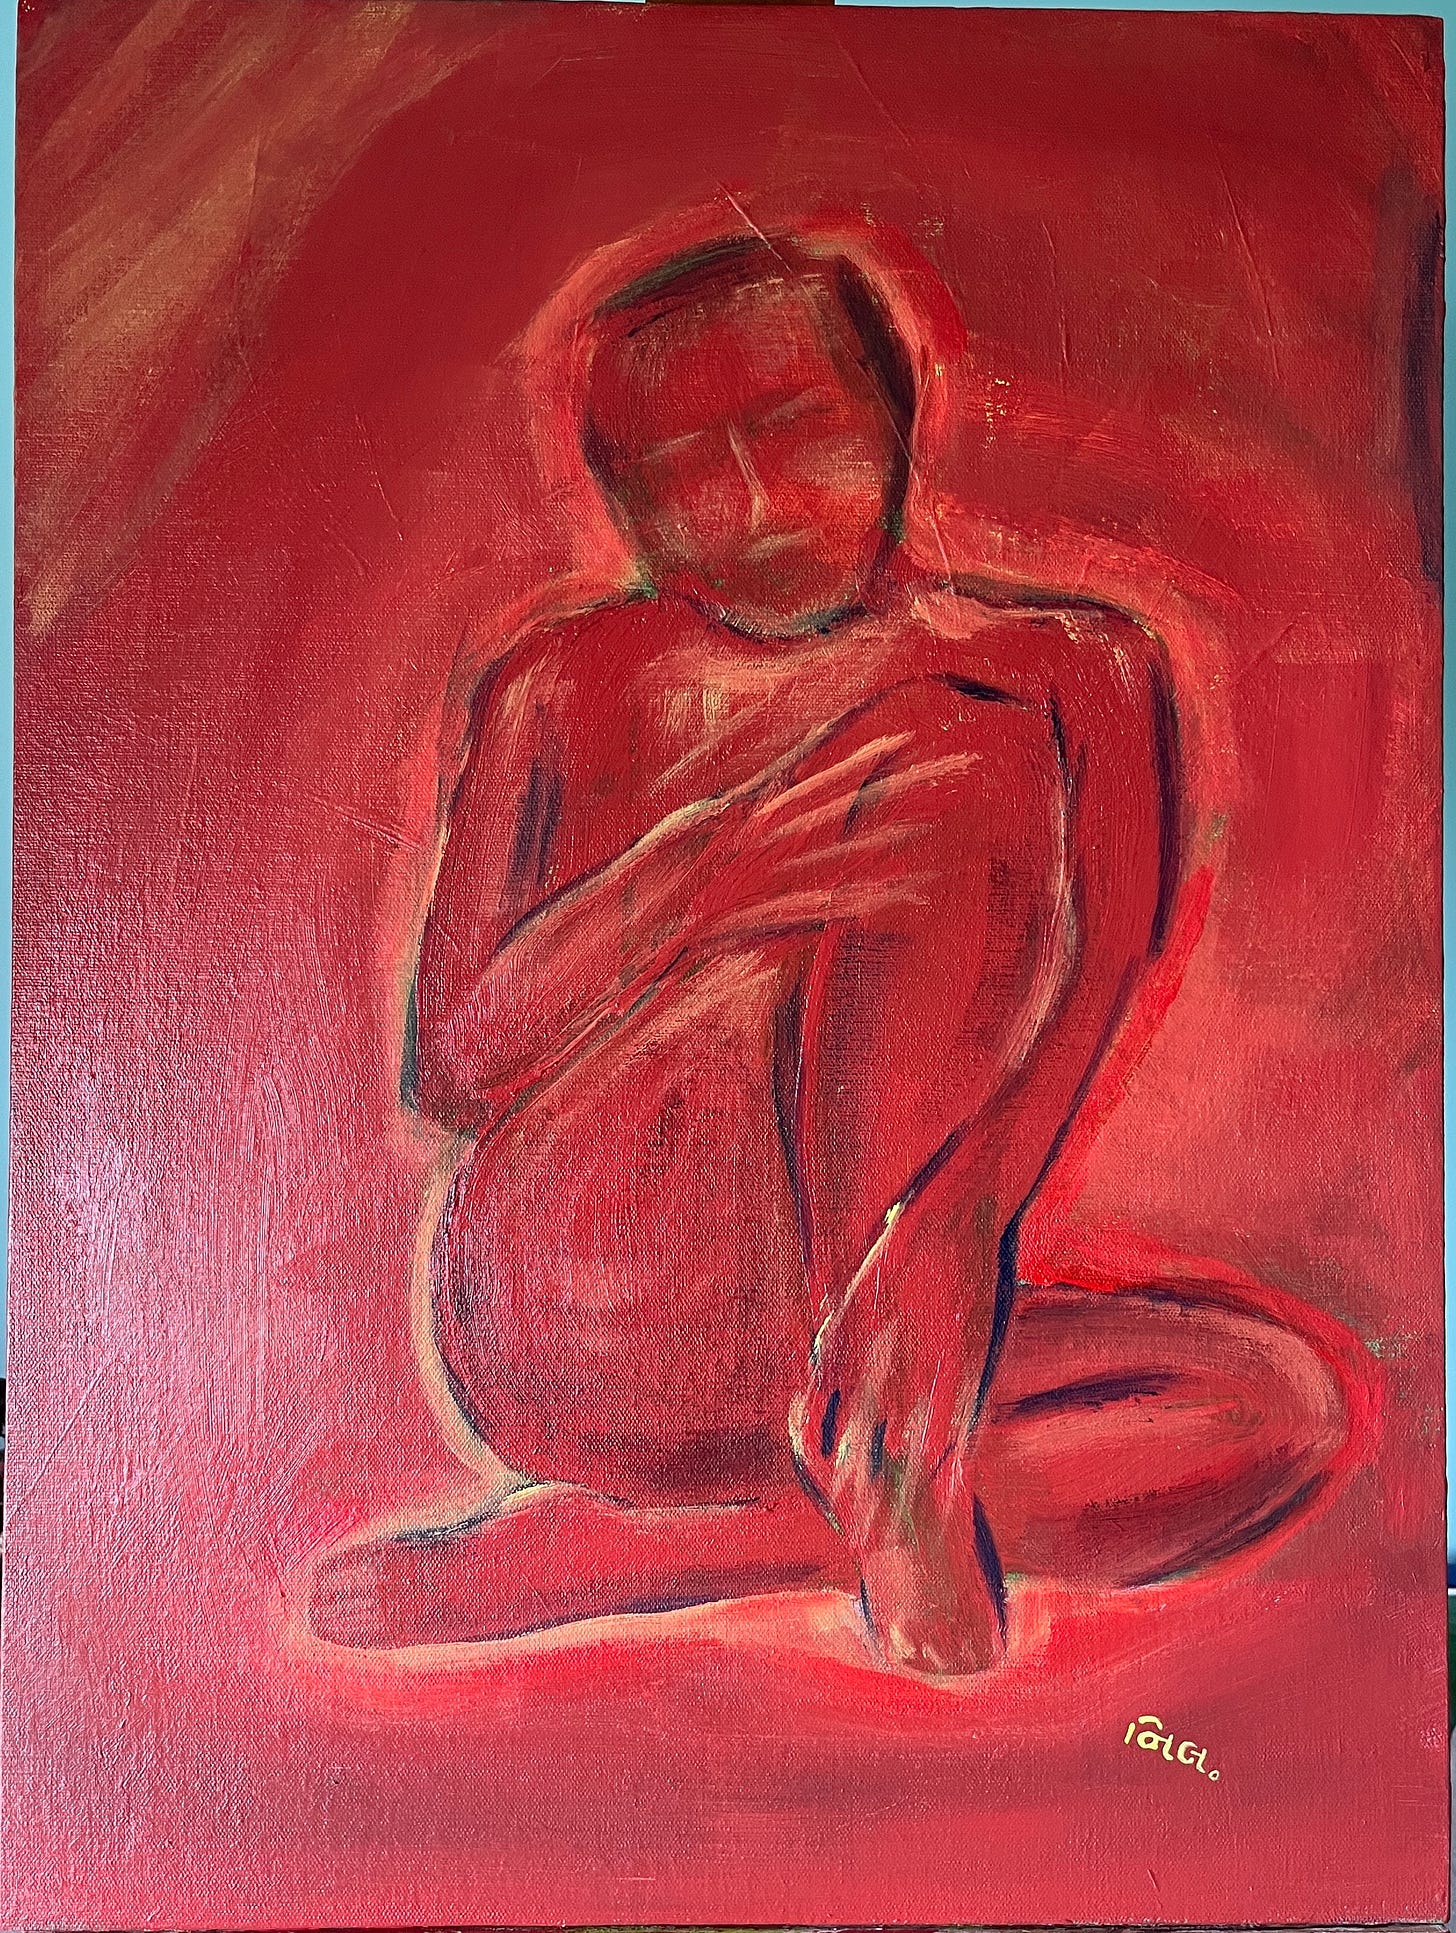 a painting in shades of red and yellow, of a figure seated with one knee up, but their face has no discernible features and they're blending with the red background.